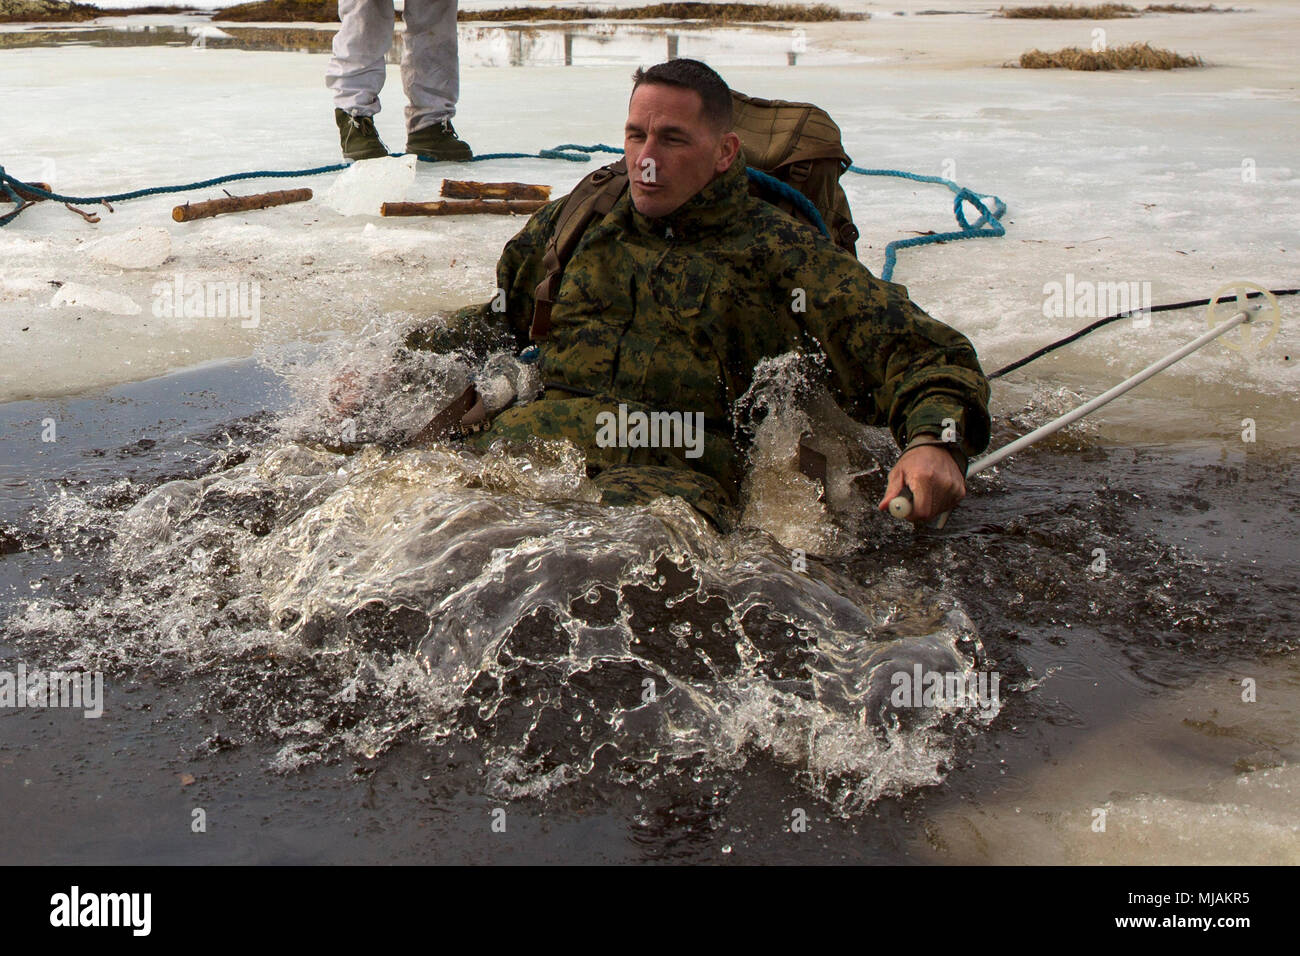 Black Sea Rotational Force and Marine Rotational Force-Europe 18.1 Sgt. Maj. Paul Schuster jumps into icy waters to be the second individual from his unit to complete the polar plunge during a winter warfare training exercise at Haltdalen Training Center, Norway, April 20, 2018. More than 70 Marines and Sailors spent three weeks in the Norwegian wilderness learning cold weather survival techniques, which were taught by Norwegian Soldiers with Home Guard 12. Marines and Sailors who participated in the polar plunge learned how to properly retain their gear and escape after falling through the ic Stock Photo